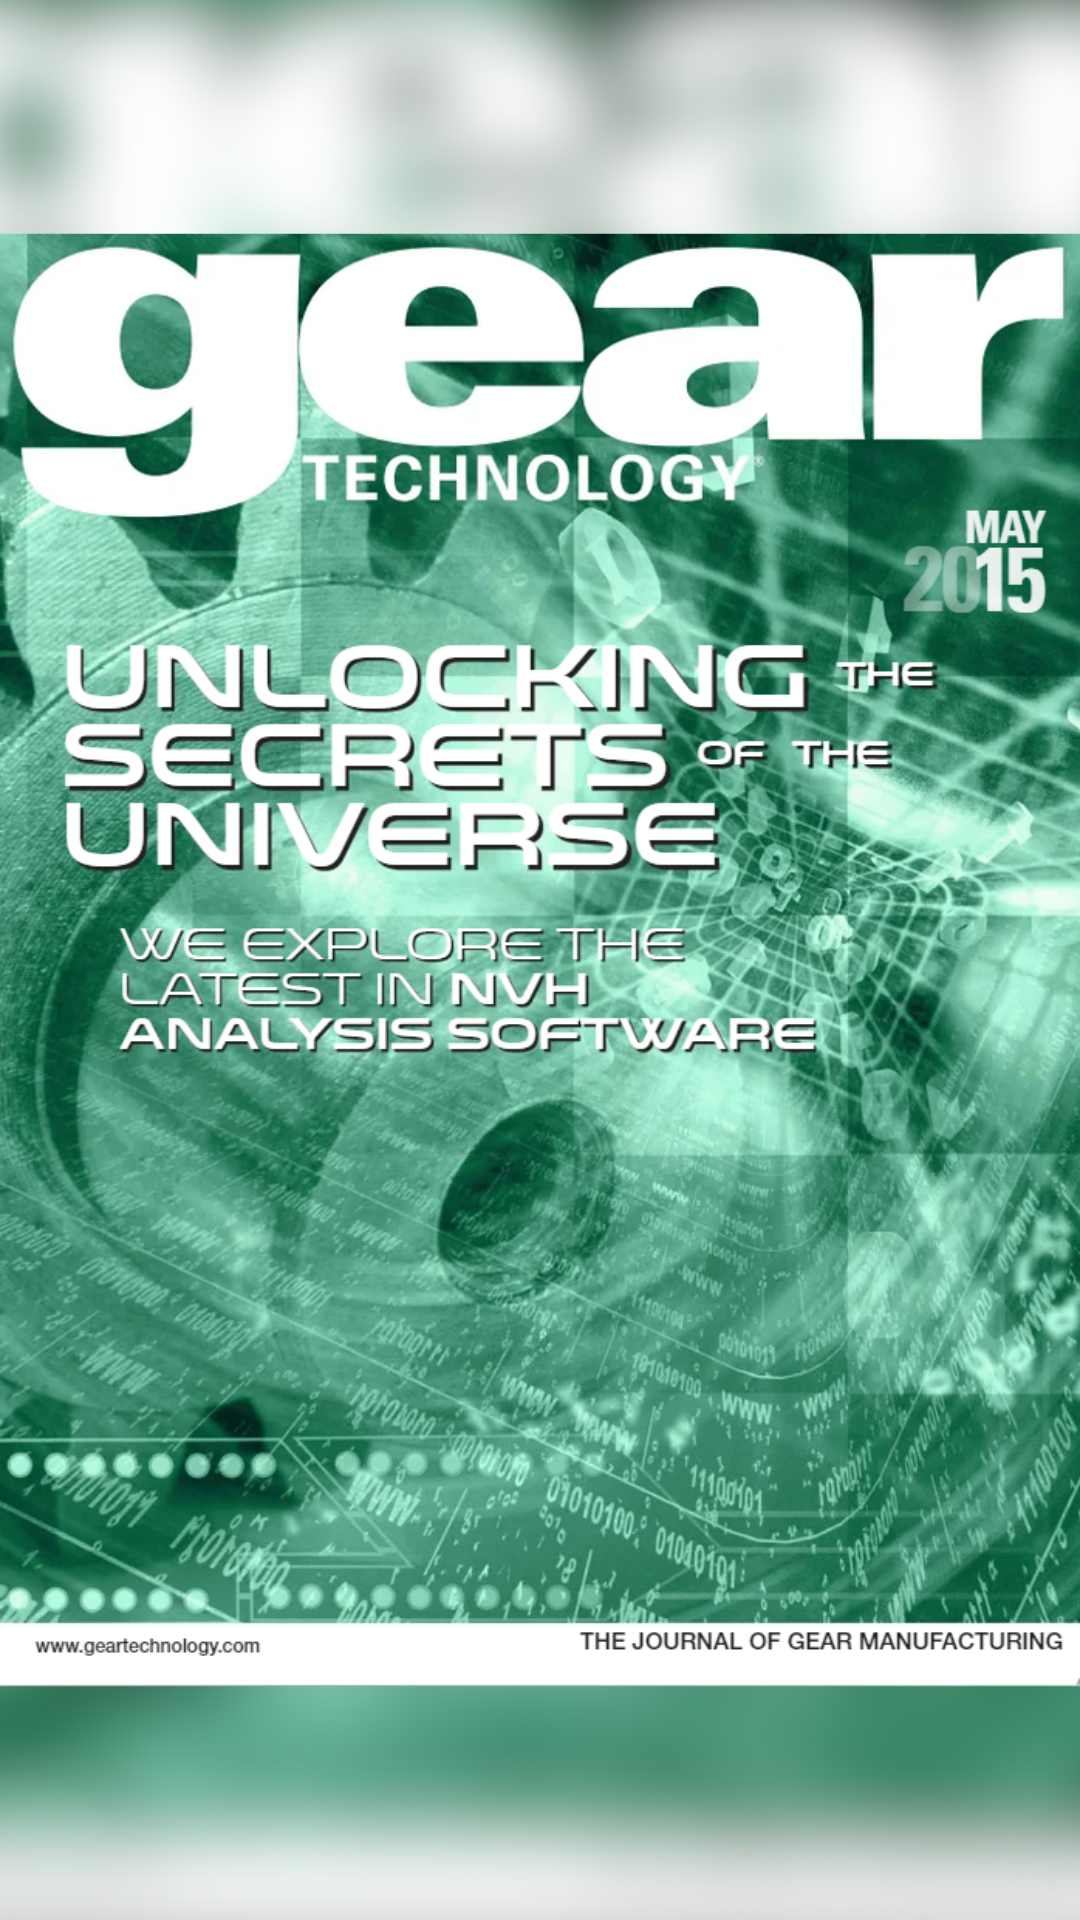 Gear Technology May 2015 'Unlocking The Secrets of The Universe' front cover.